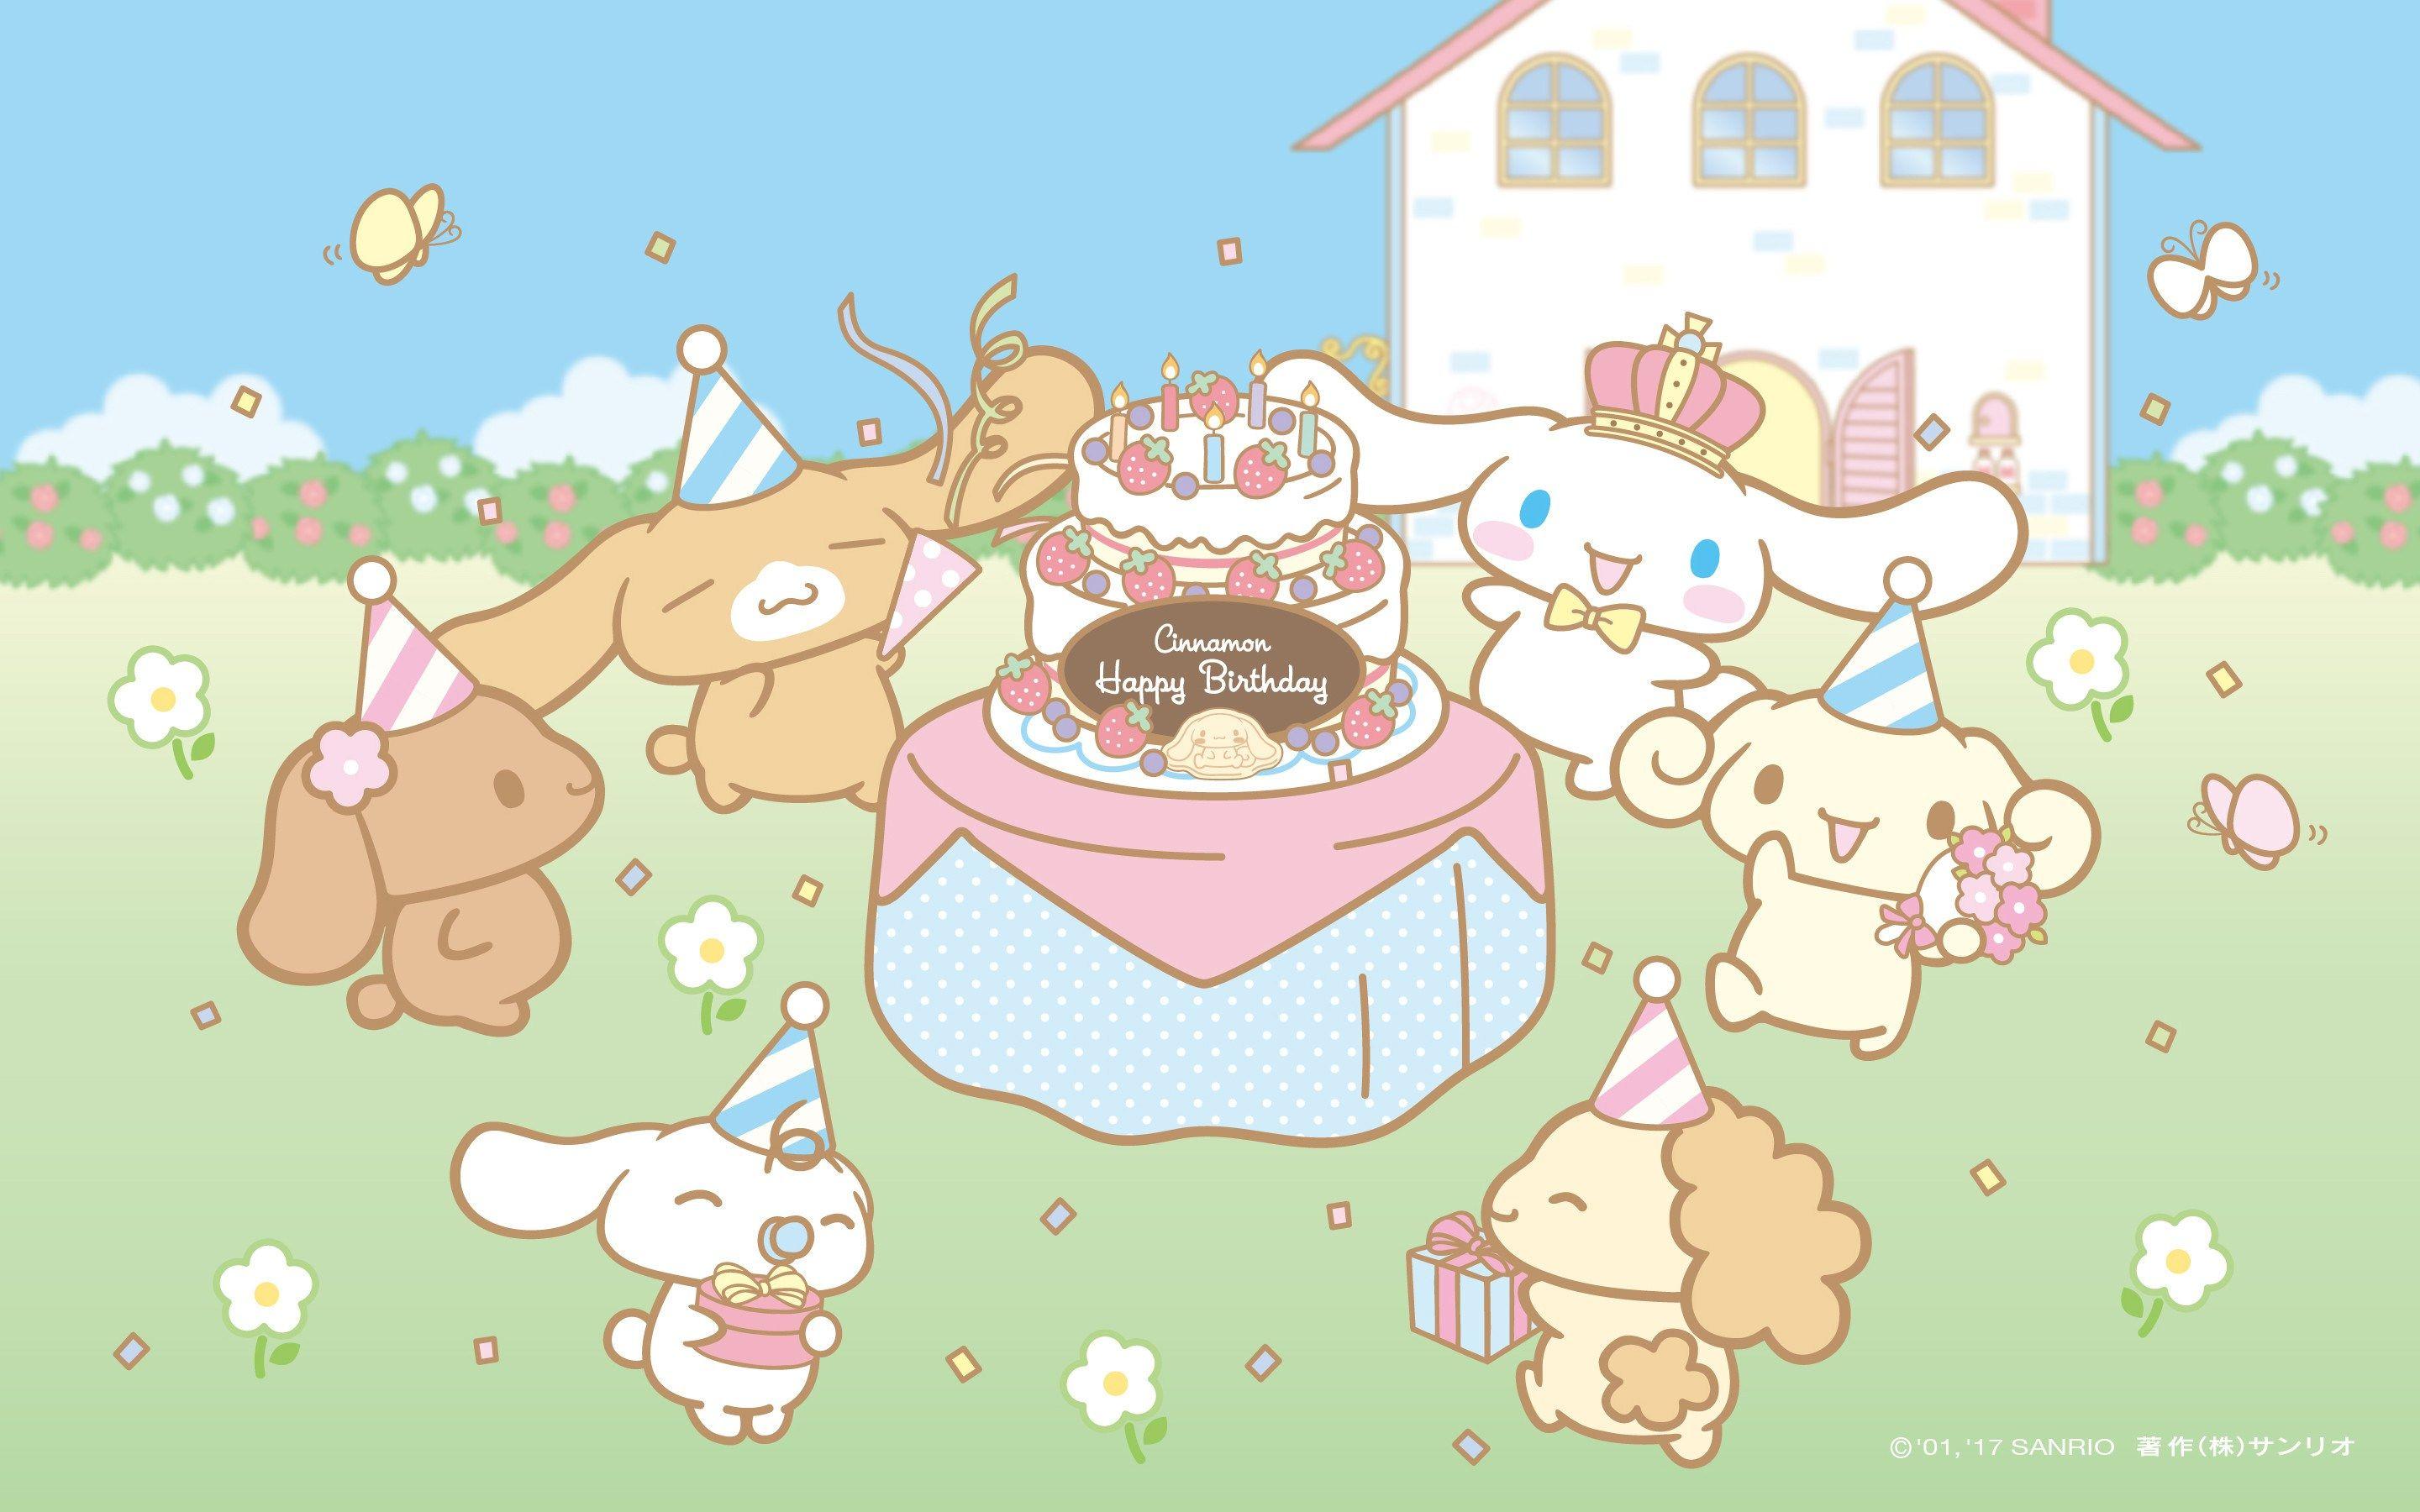 All Sanrio Characters Wallpapers - Top Free All Sanrio Characters